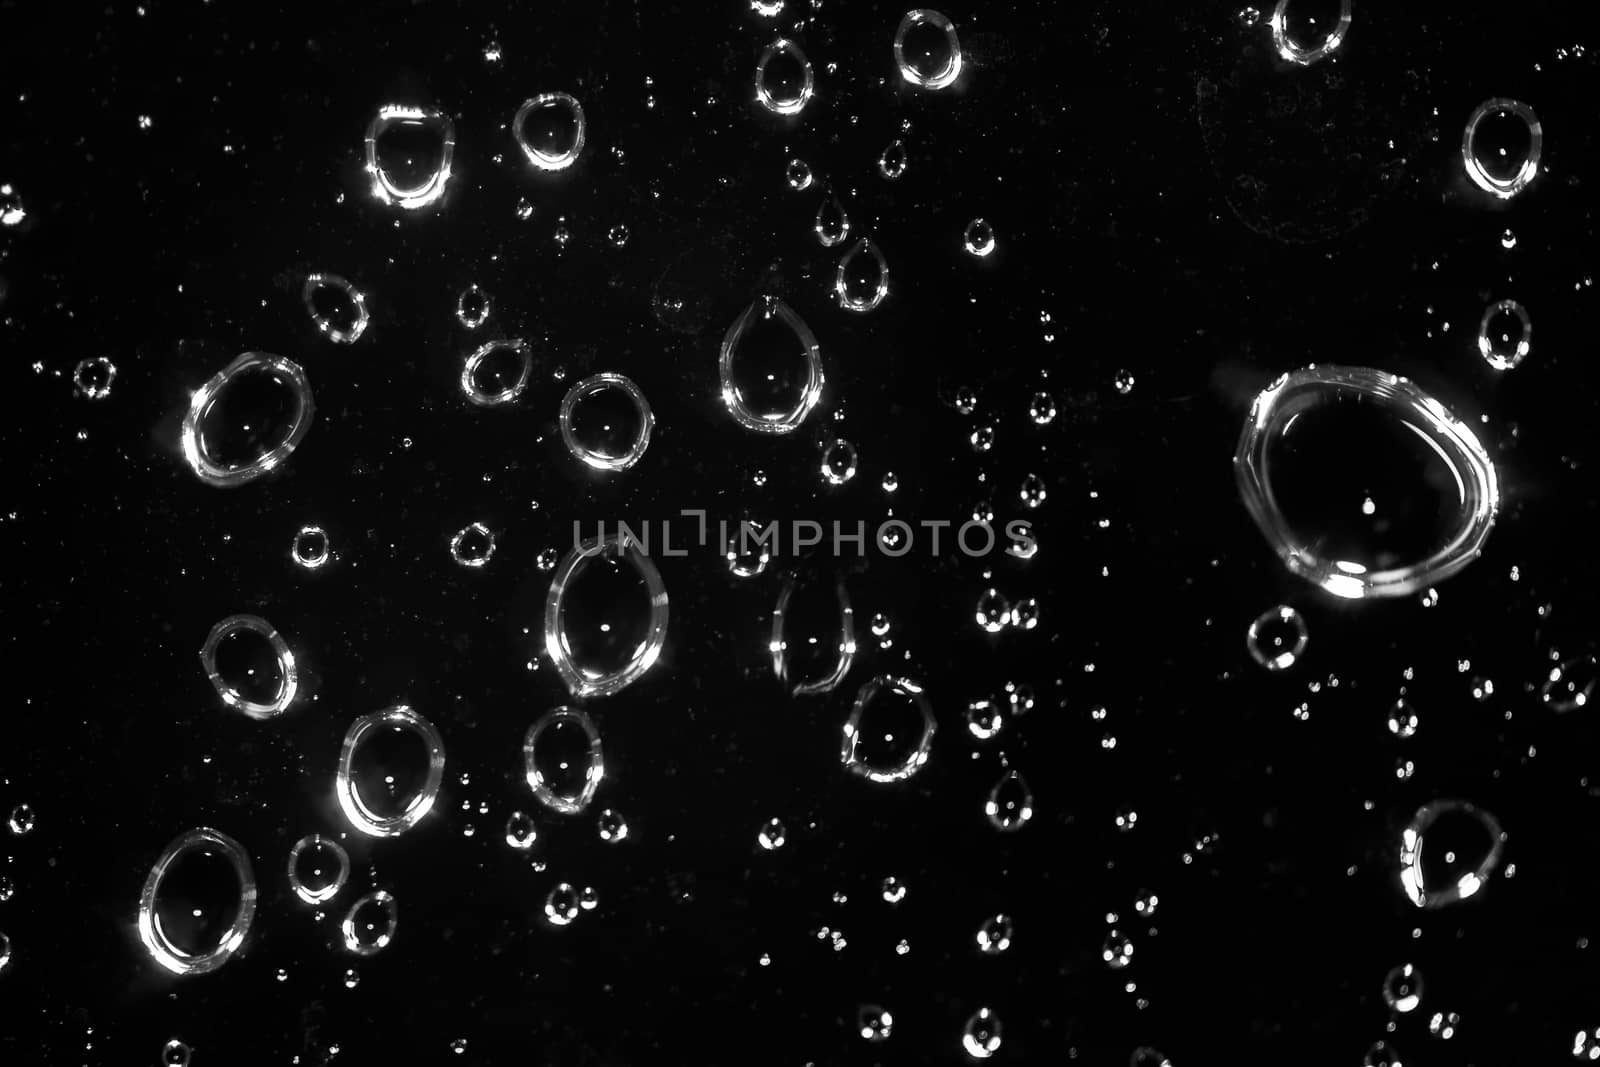 Raindrops by bkenney5@gmail.com